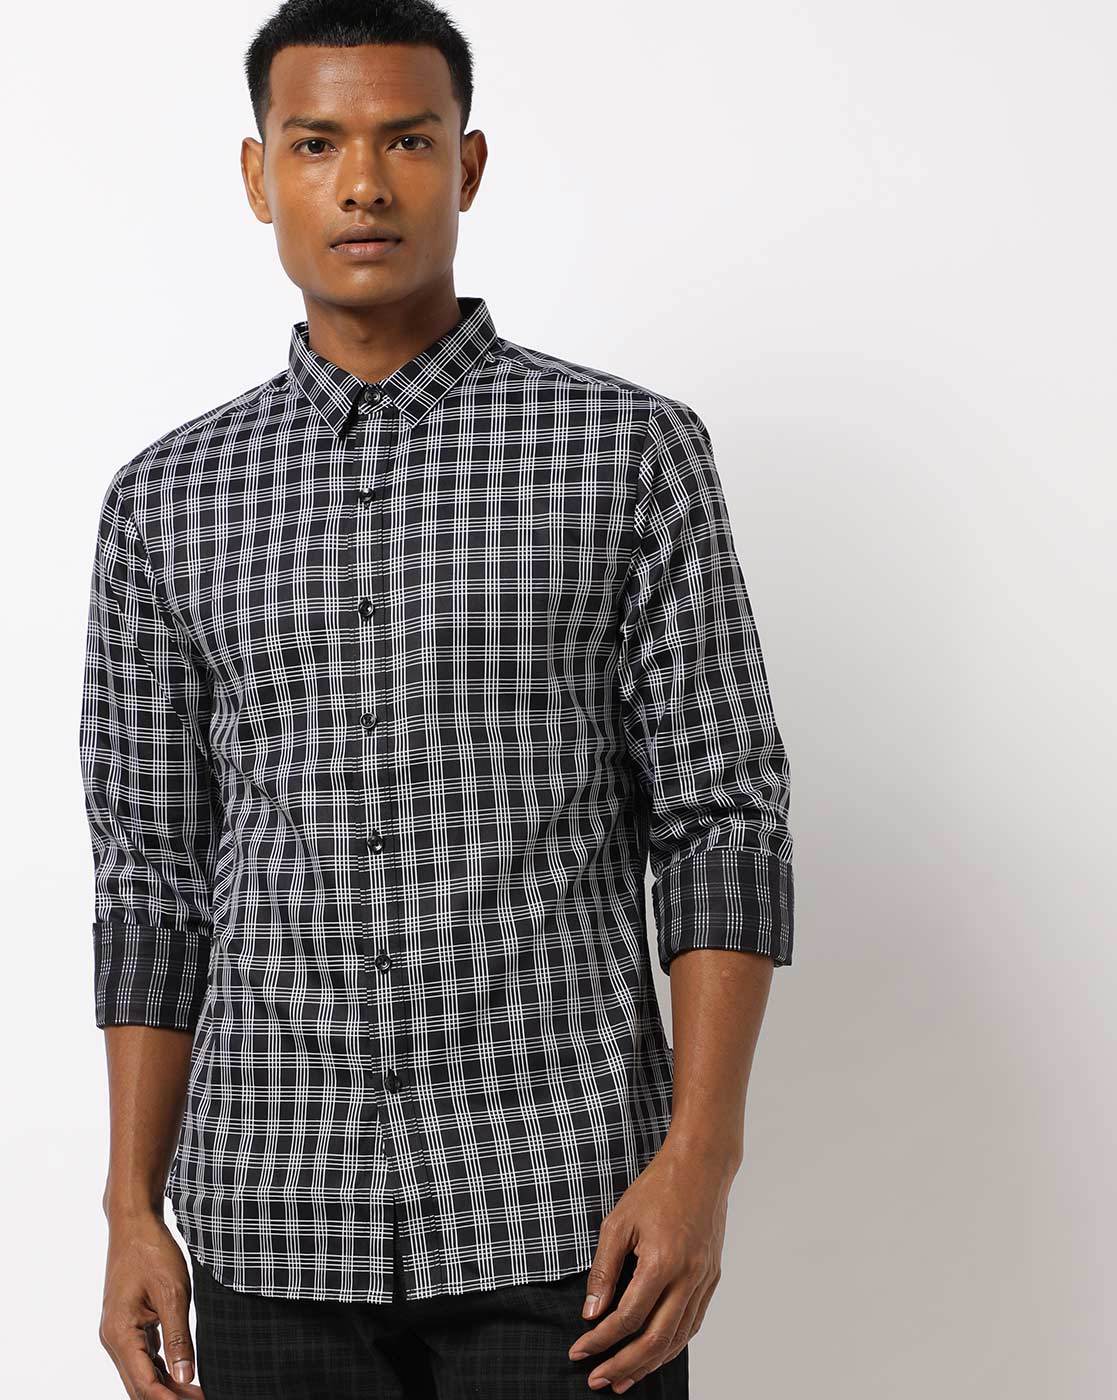 Buy Black Shirts for Men by LEVIS 